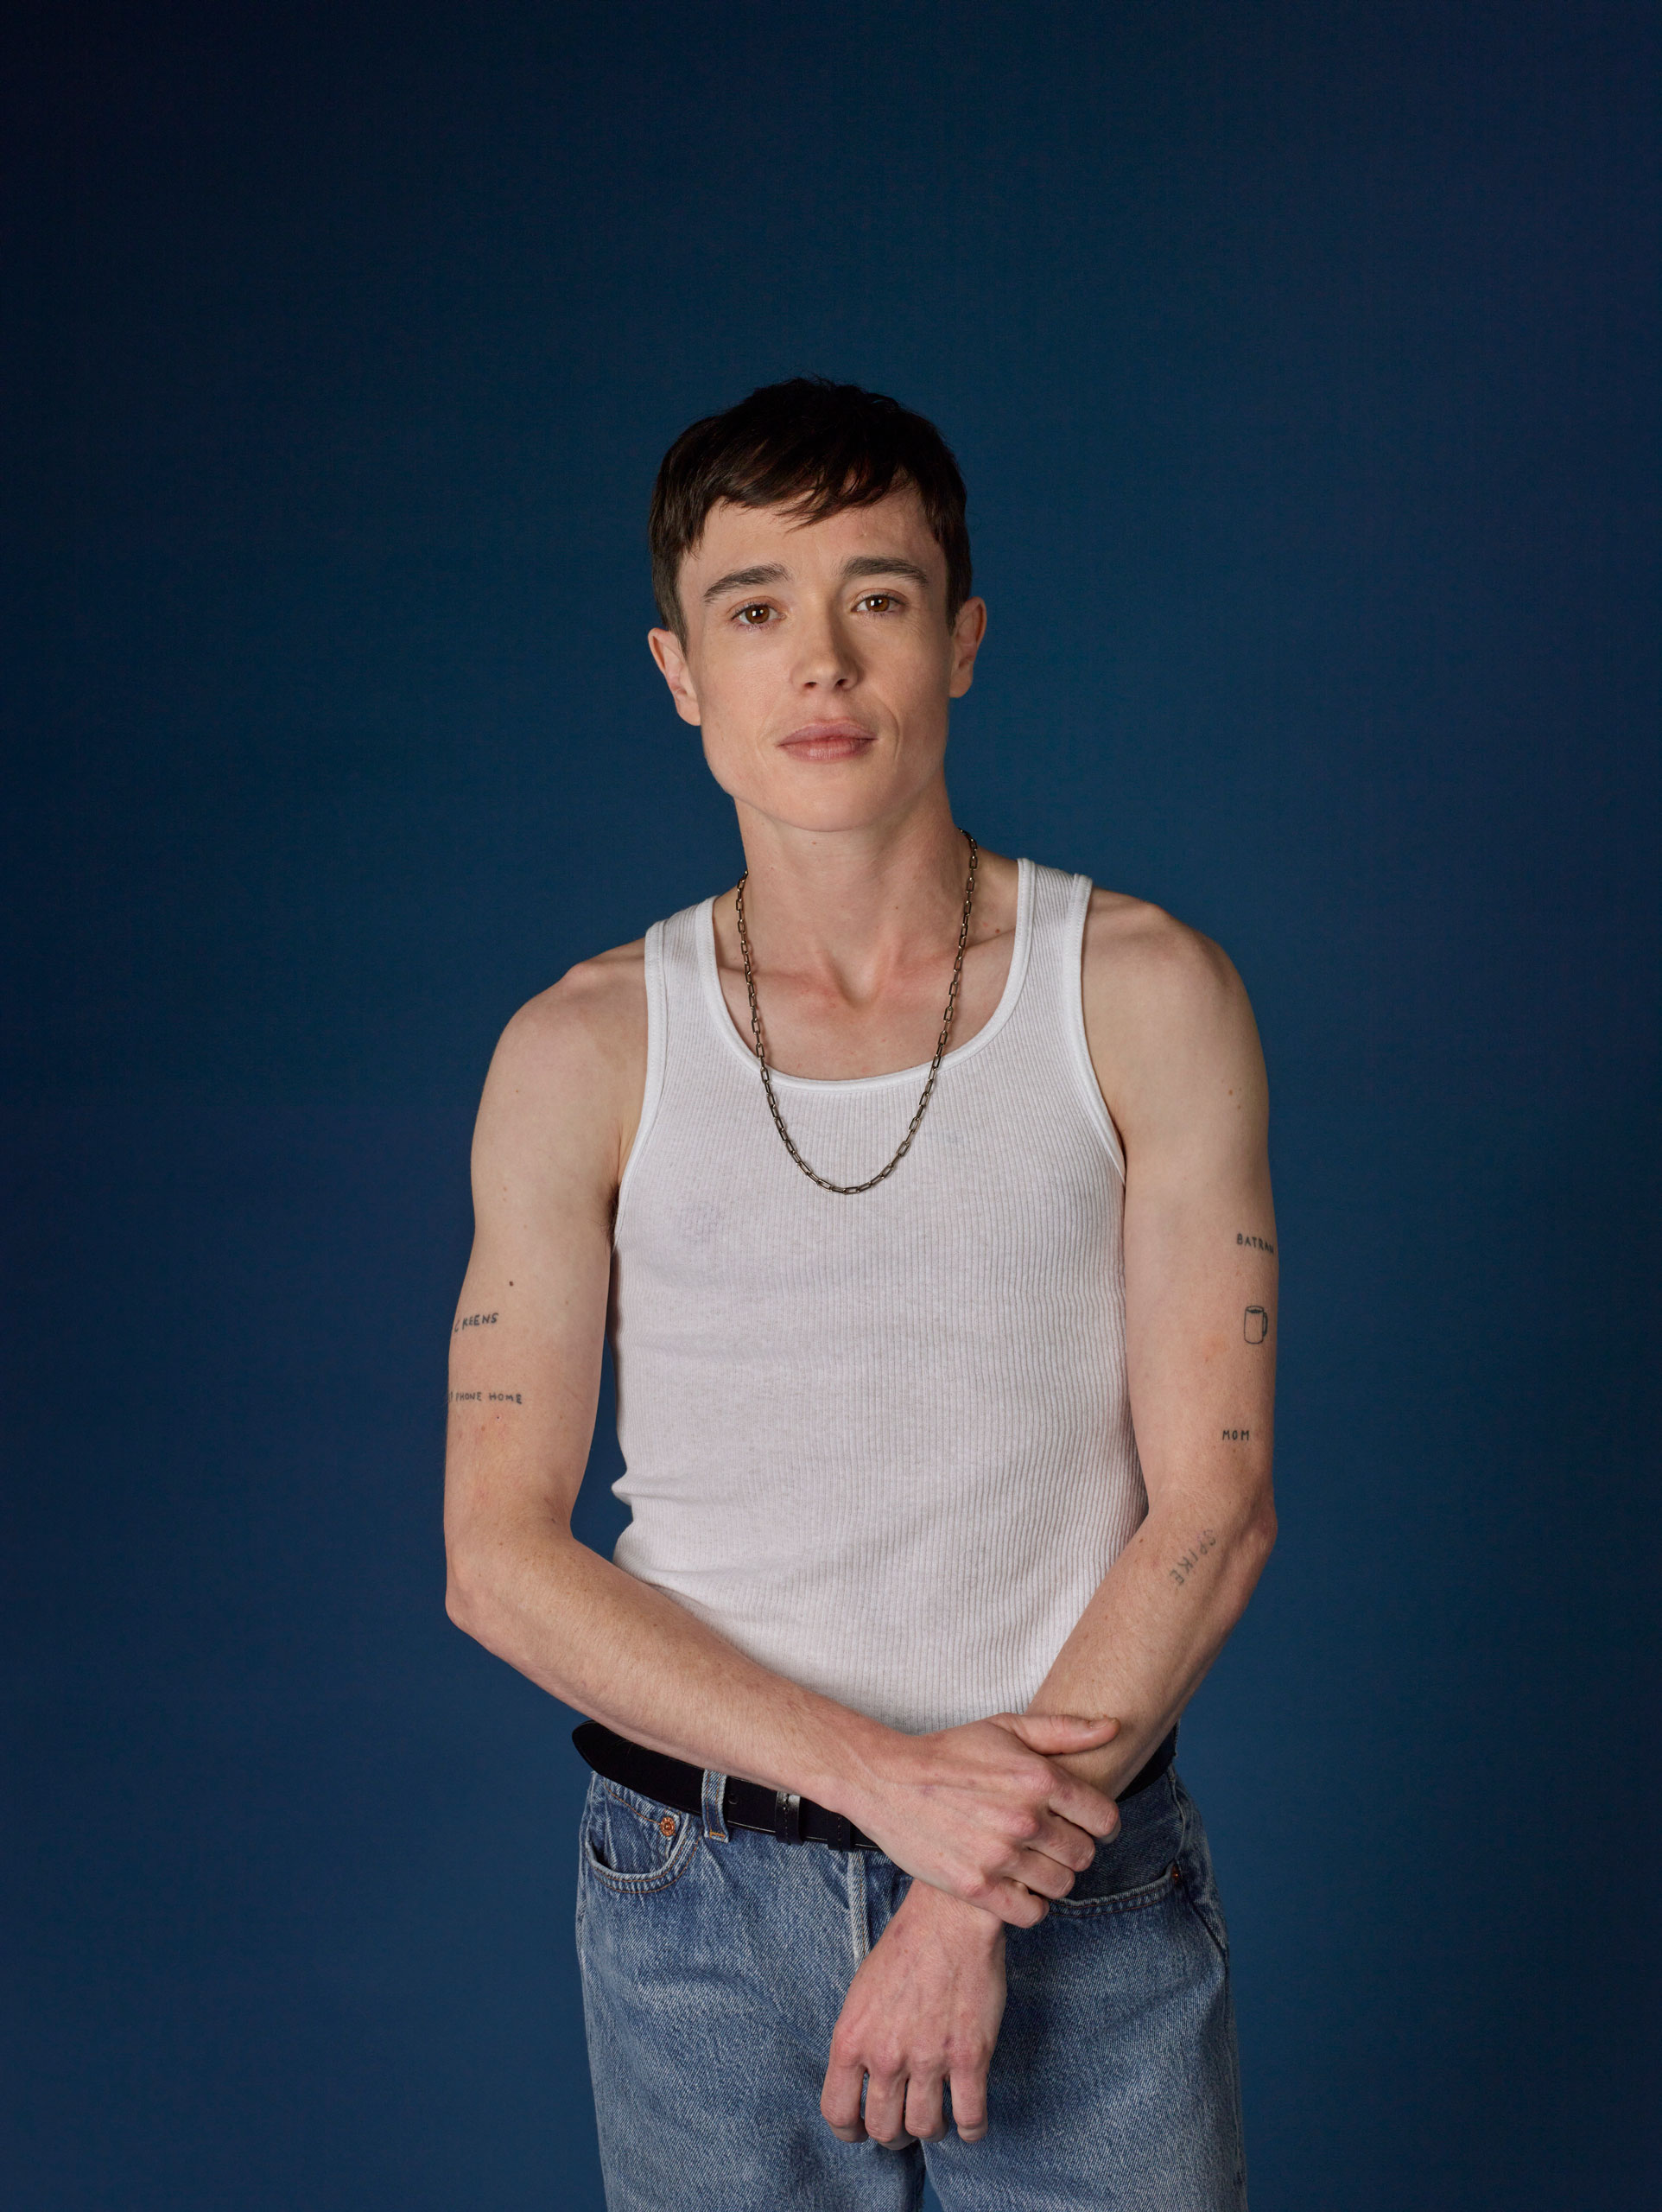 Actor and activist Elliot Page writes in his new memoir 'Pageboy' about the struggles he faced on the way to embracing his trans identity. (Catherine Opie)